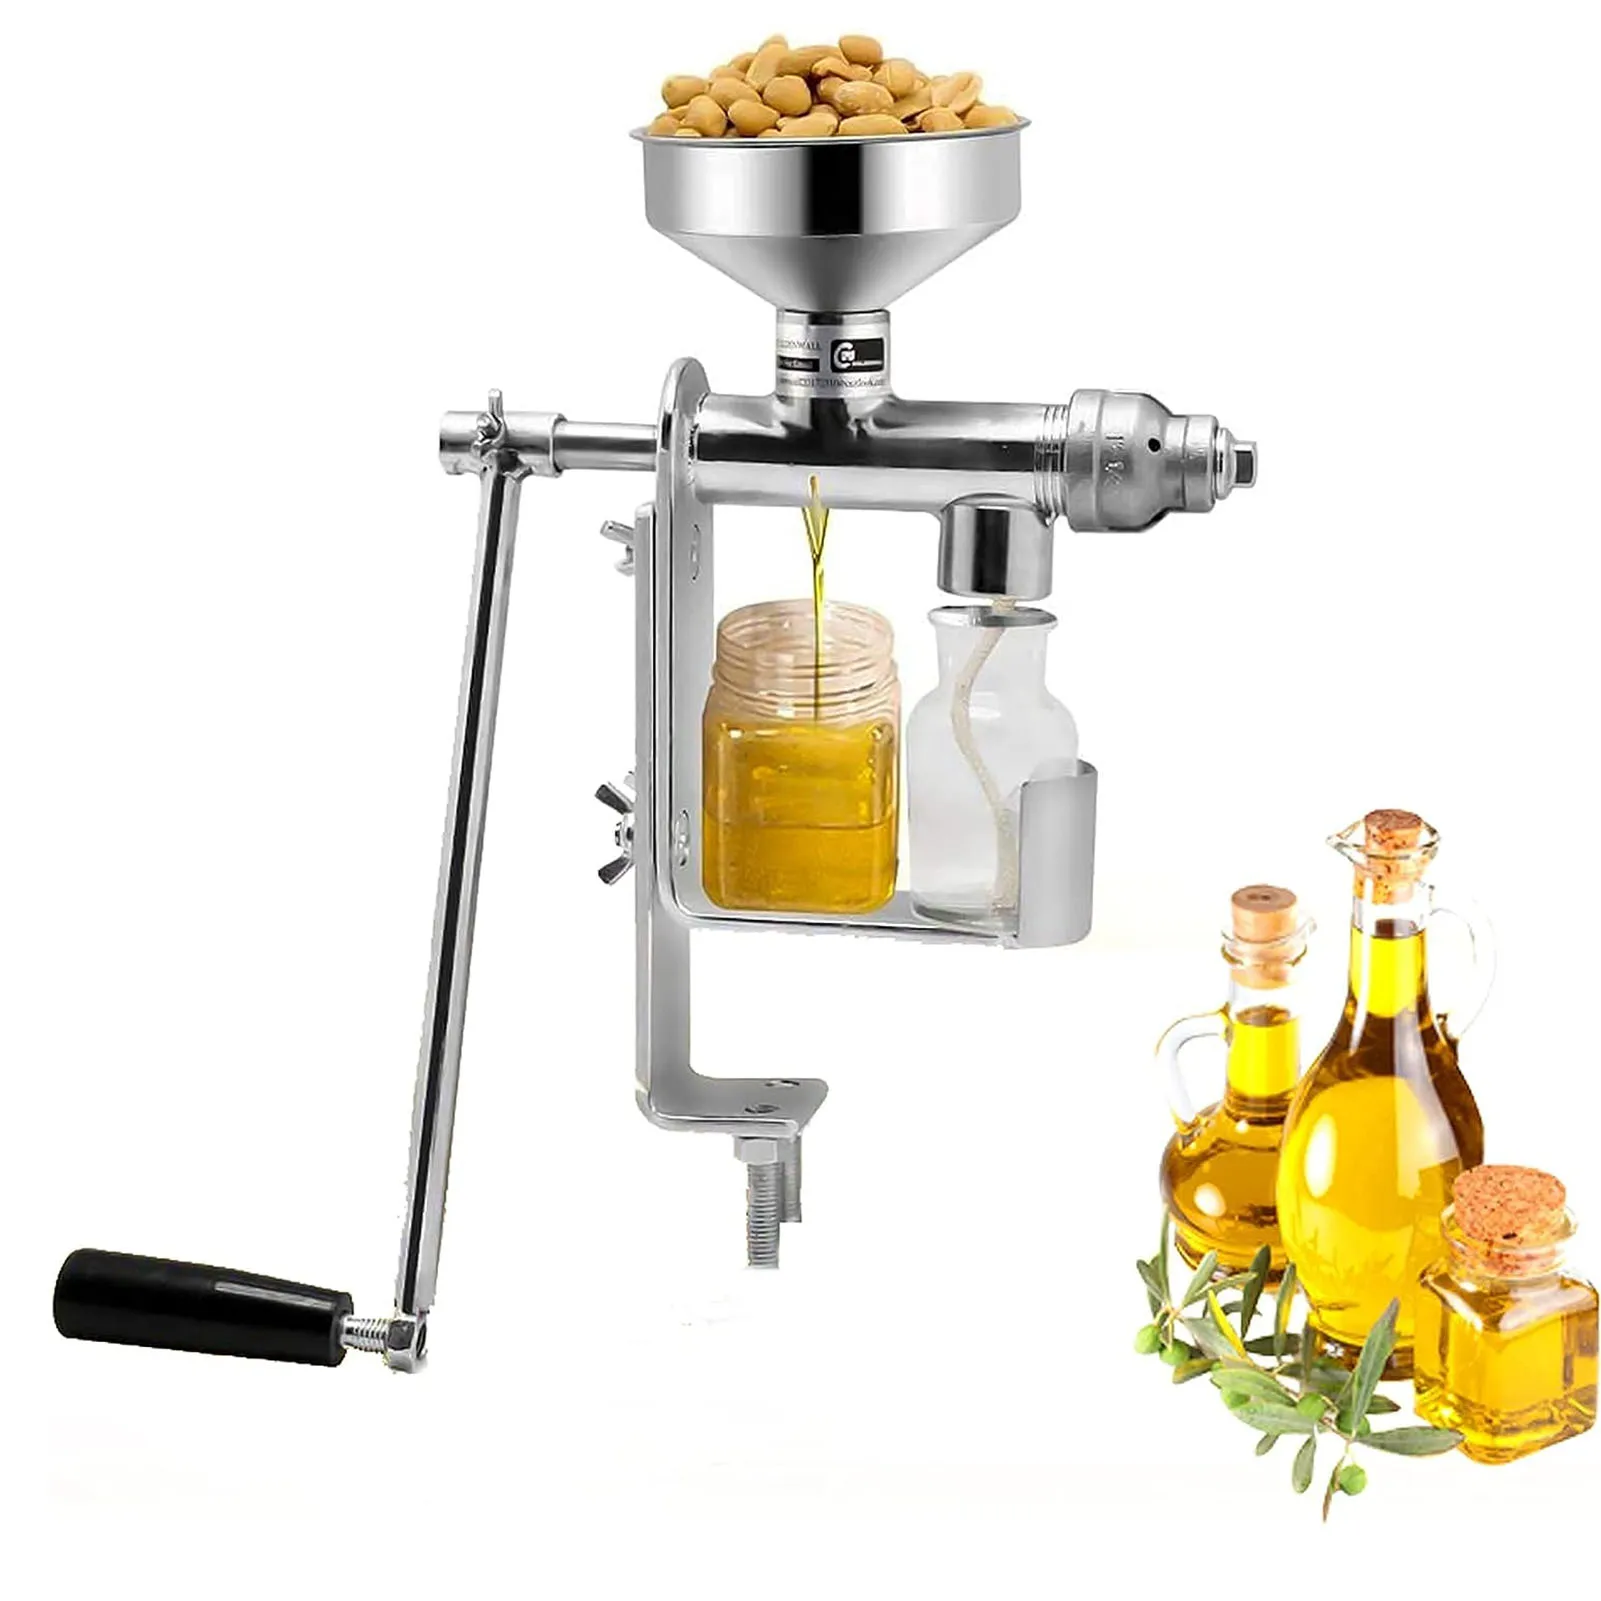 kf-S202dfa3df89c4db0afcecc33dbb3c4776-Manual-Oil-Press-Machine-Stainless-Steel-Cold-Hot-Press-Oil-Maker-for-Nuts-Seed-Home-Oil